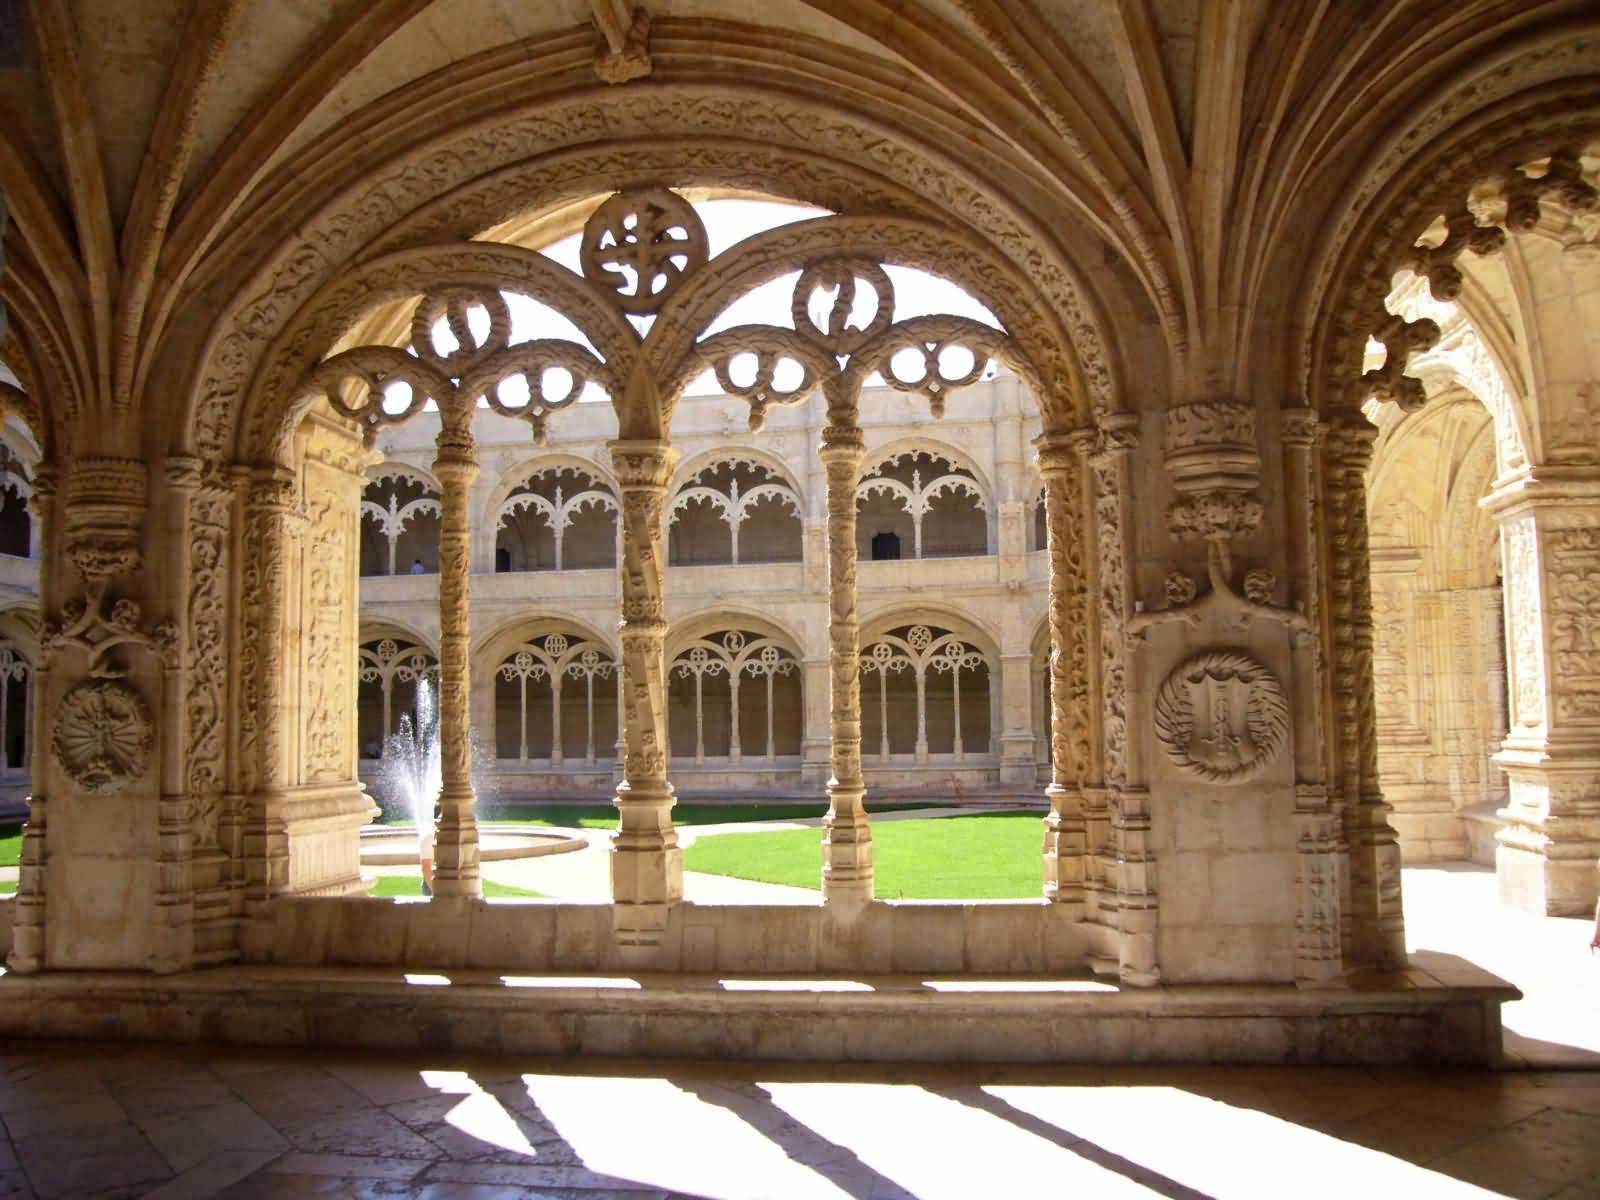 Decorated Cloister Arches Inside The Jeronimos Monastery